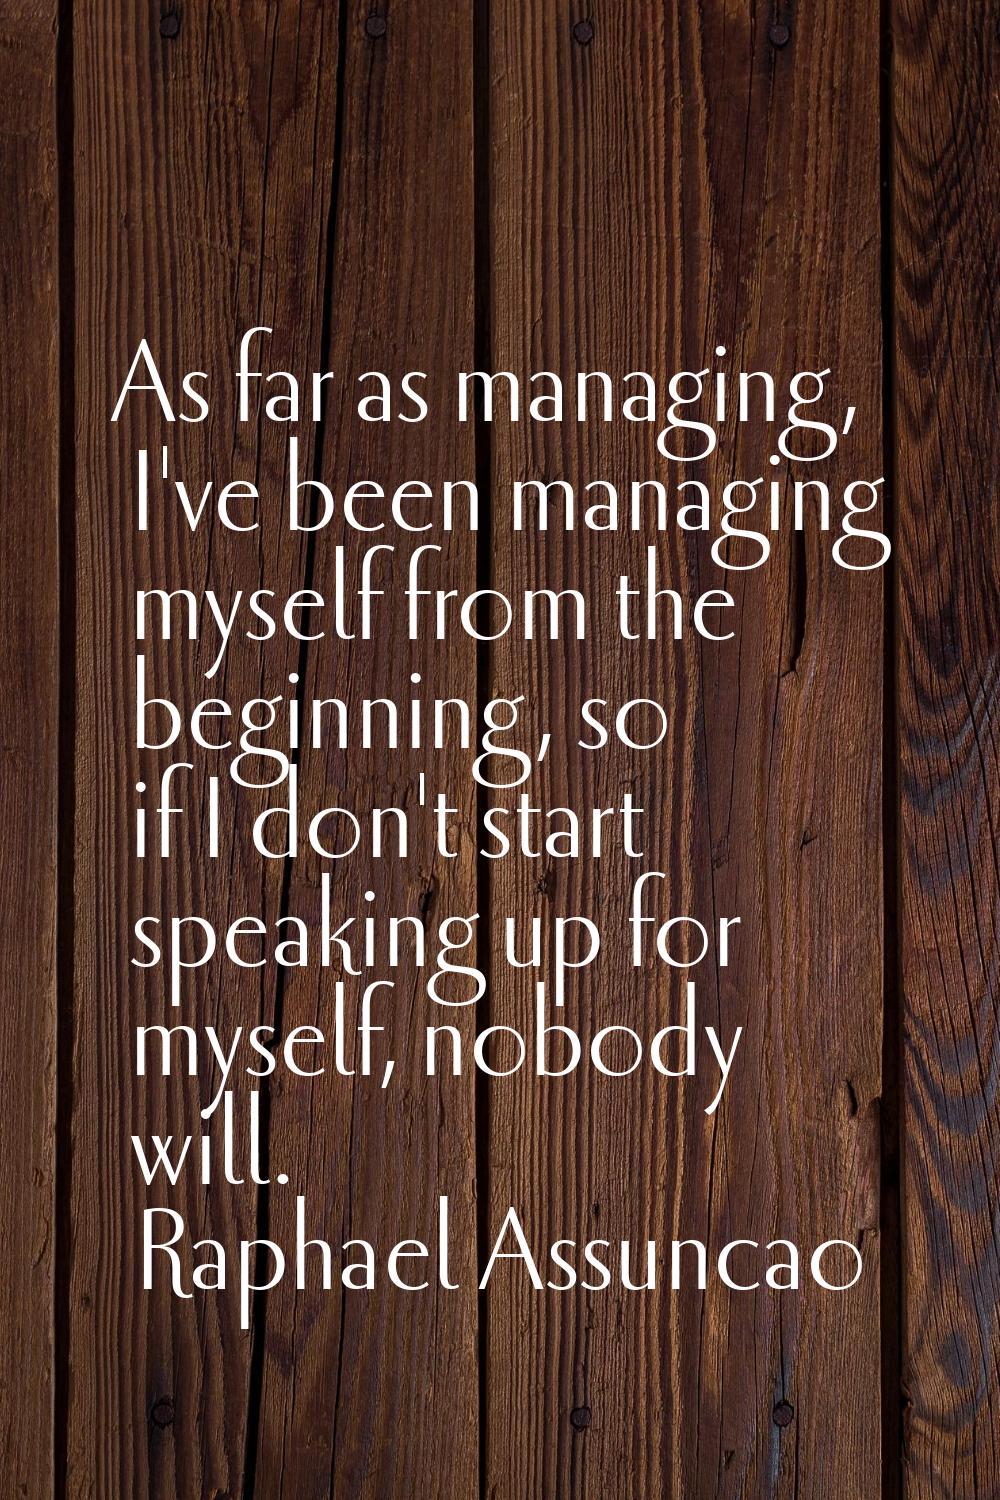 As far as managing, I've been managing myself from the beginning, so if I don't start speaking up f